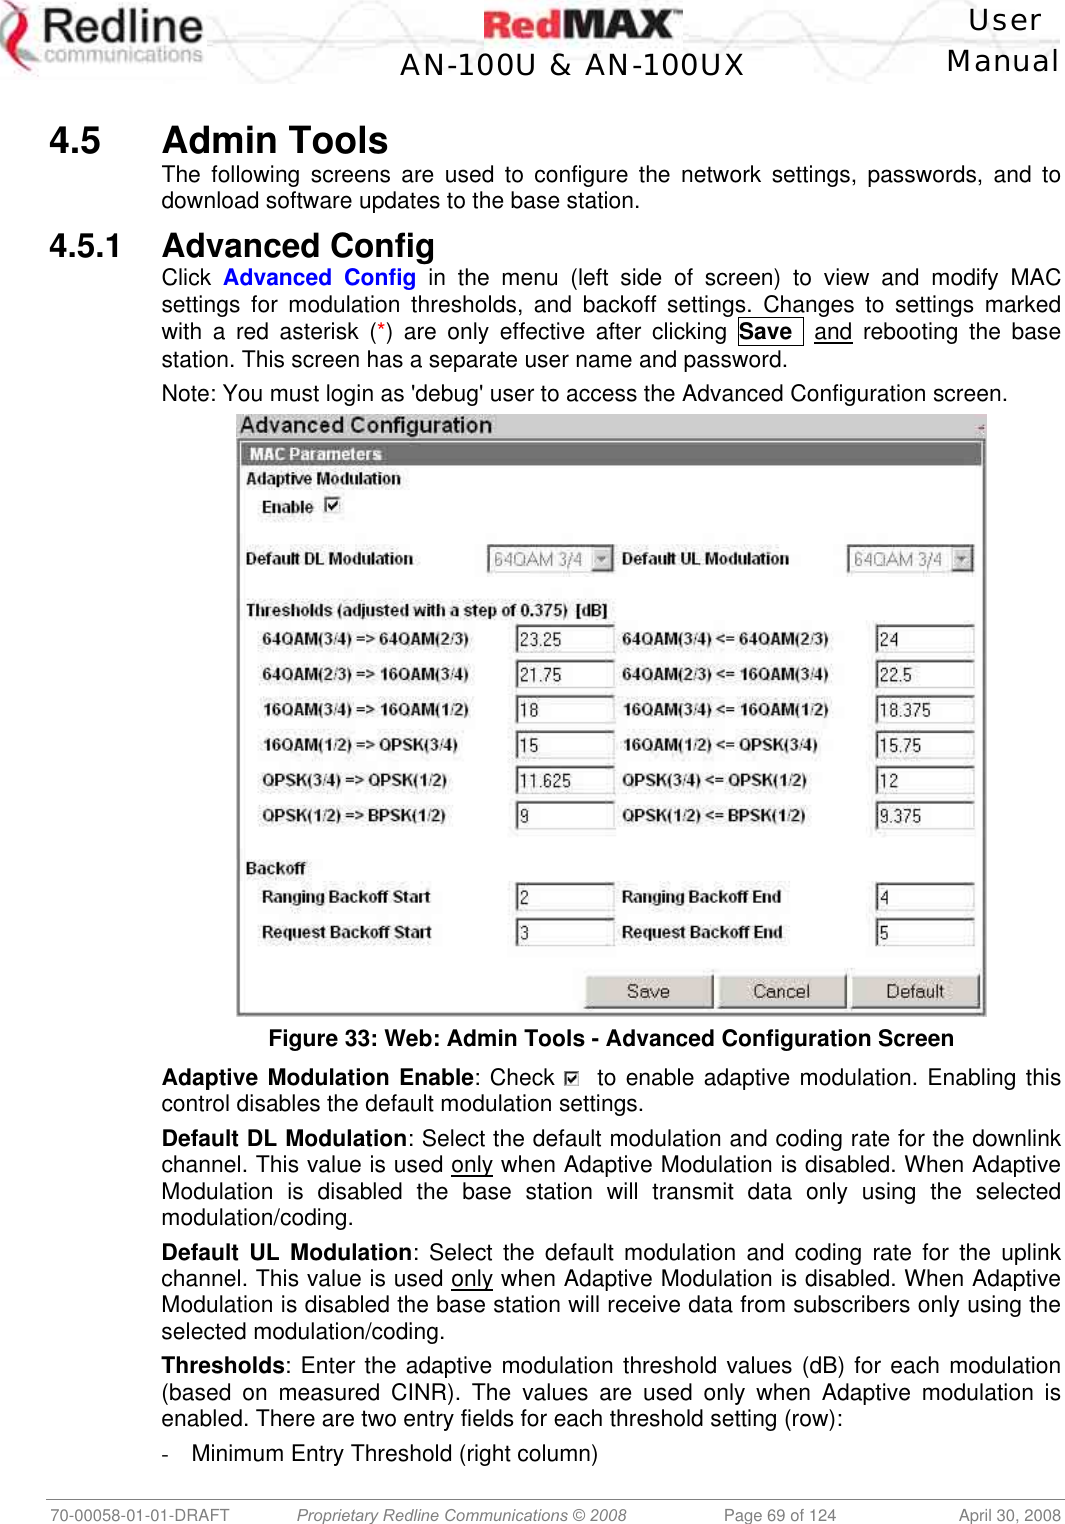    User  AN-100U &amp; AN-100UX Manual   70-00058-01-01-DRAFT  Proprietary Redline Communications © 2008   Page 69 of 124  April 30, 2008  4.5 Admin Tools The following screens are used to configure the network settings, passwords, and to download software updates to the base station. 4.5.1 Advanced Config Click  Advanced Config in the menu (left side of screen) to view and modify MAC settings for modulation thresholds, and backoff settings. Changes to settings marked with a red asterisk (*) are only effective after clicking Save   and rebooting the base station. This screen has a separate user name and password. Note: You must login as &apos;debug&apos; user to access the Advanced Configuration screen.  Figure 33: Web: Admin Tools - Advanced Configuration Screen Adaptive Modulation Enable: Check    to enable adaptive modulation. Enabling this control disables the default modulation settings. Default DL Modulation: Select the default modulation and coding rate for the downlink channel. This value is used only when Adaptive Modulation is disabled. When Adaptive Modulation is disabled the base station will transmit data only using the selected modulation/coding. Default UL Modulation: Select the default modulation and coding rate for the uplink channel. This value is used only when Adaptive Modulation is disabled. When Adaptive Modulation is disabled the base station will receive data from subscribers only using the selected modulation/coding. Thresholds: Enter the adaptive modulation threshold values (dB) for each modulation (based on measured CINR). The values are used only when Adaptive modulation is enabled. There are two entry fields for each threshold setting (row): -  Minimum Entry Threshold (right column) 